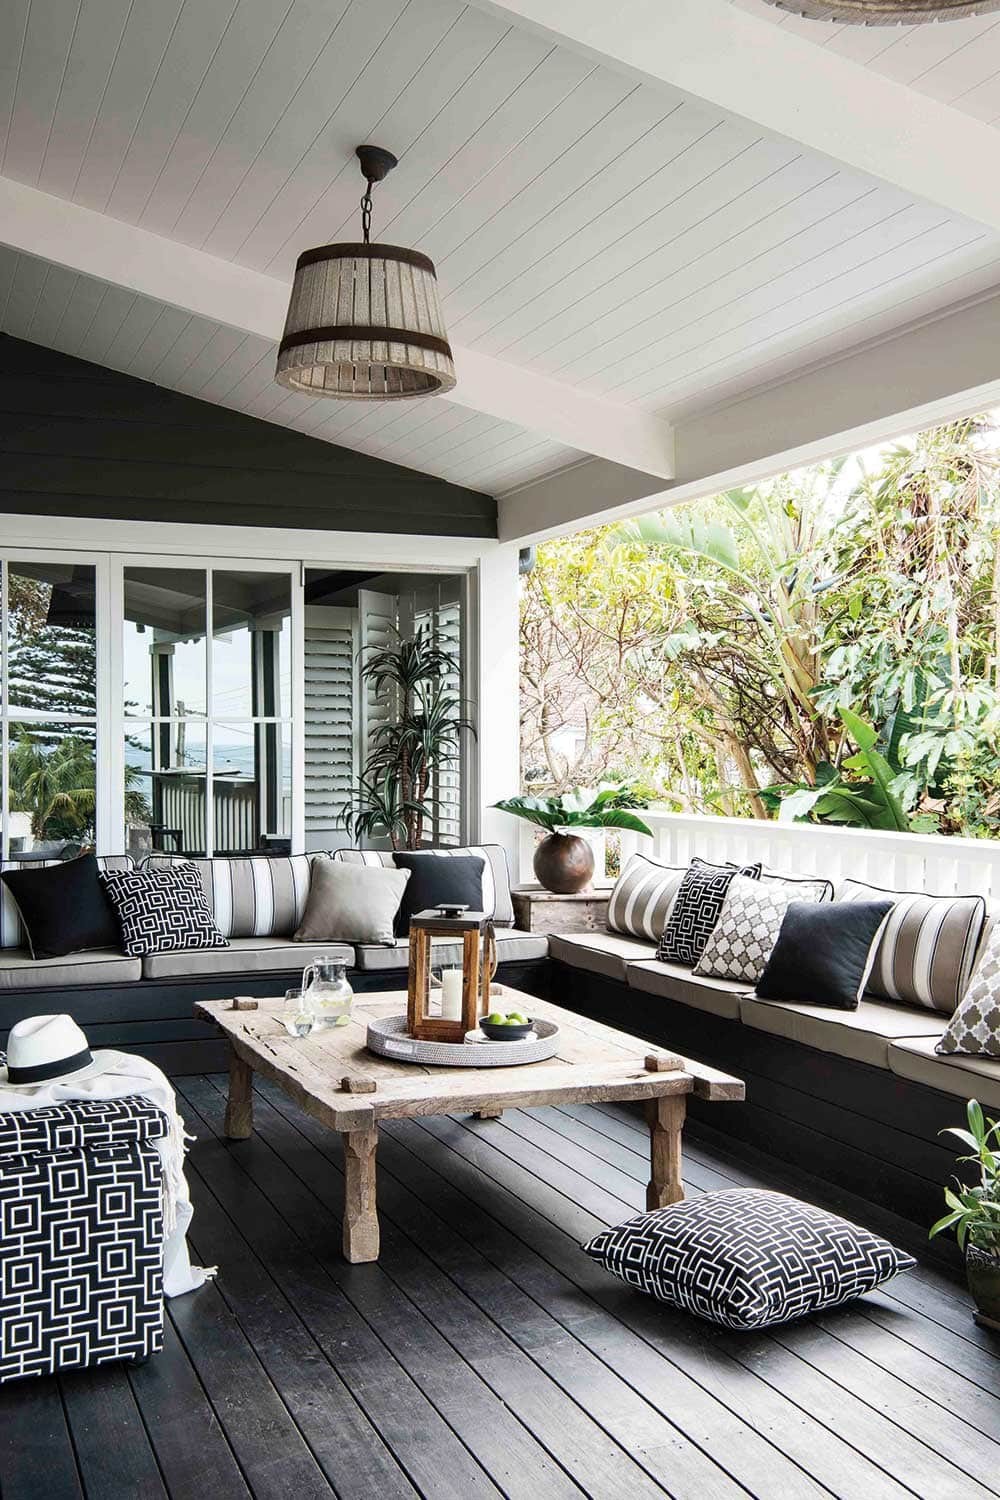 black and white outdoor room with pendant light pitched ceiling and decking